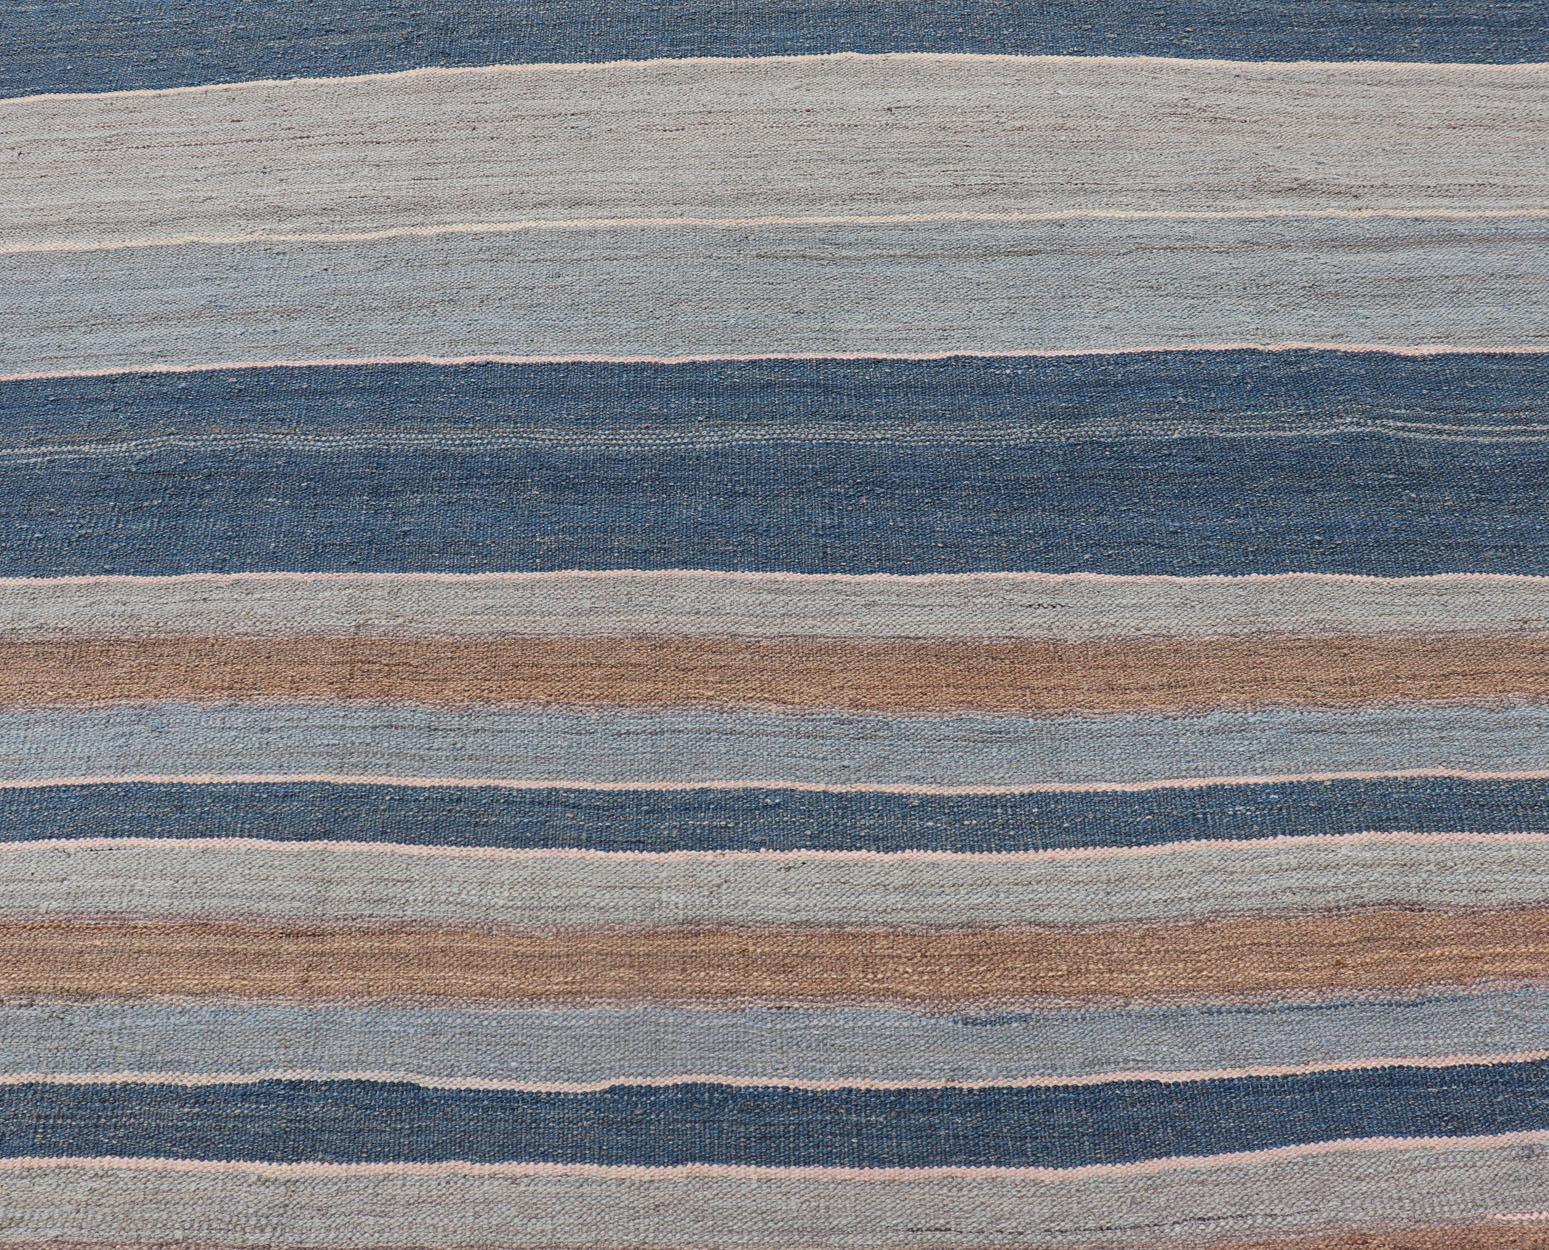 Modern Kilim Rug with Large Stripes in Shades of Blues, Brown, Gray In Excellent Condition For Sale In Atlanta, GA